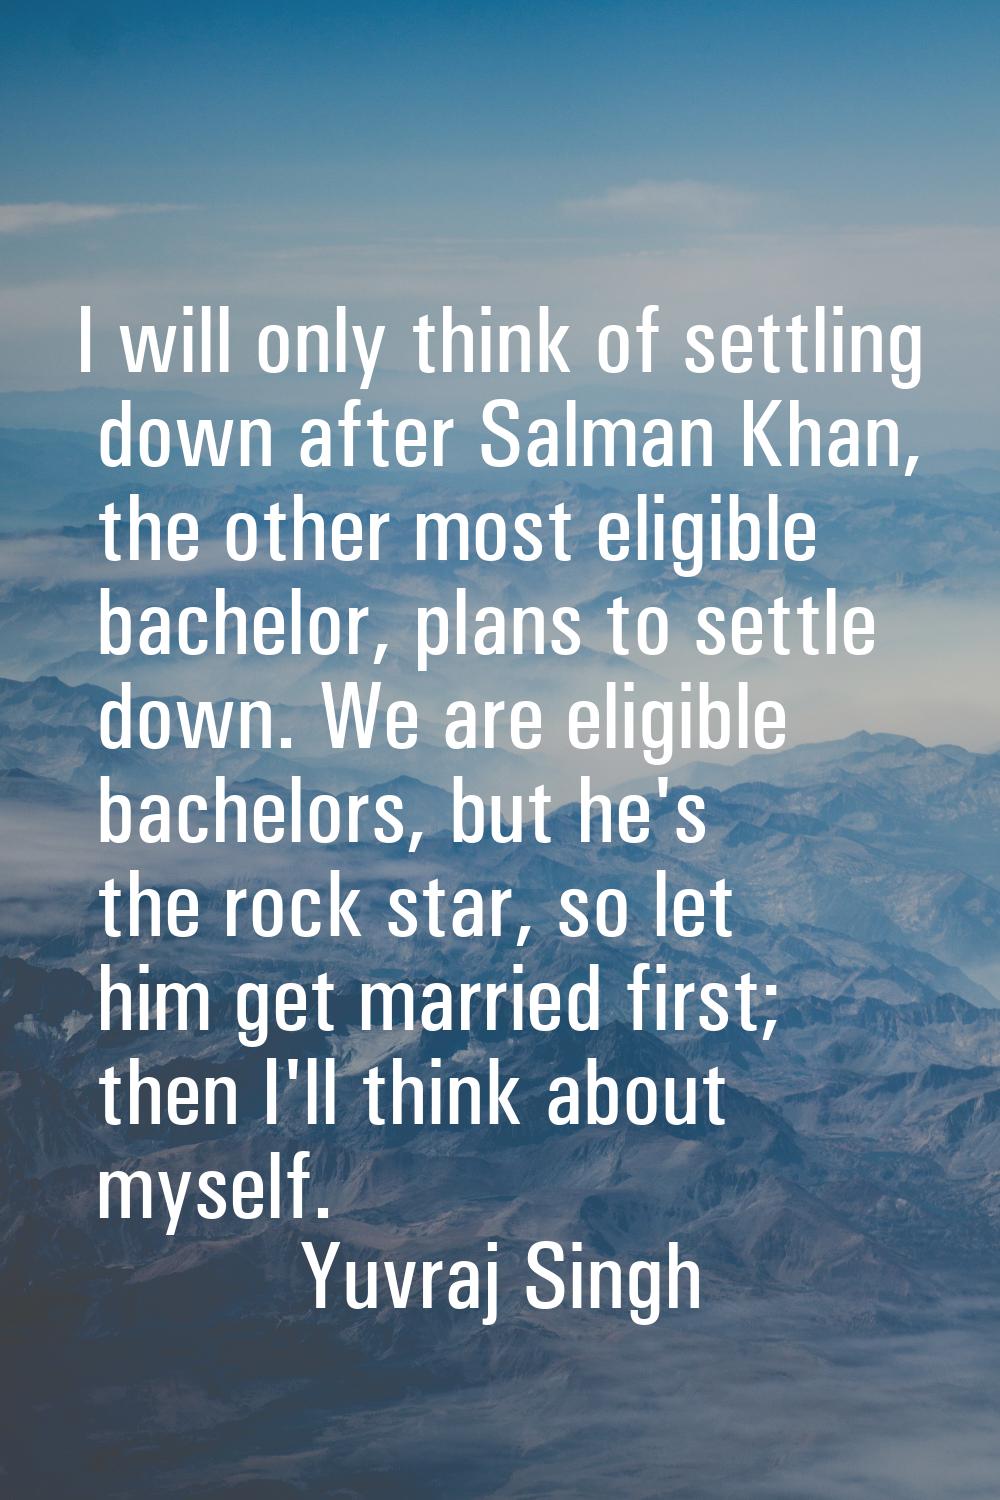 I will only think of settling down after Salman Khan, the other most eligible bachelor, plans to se